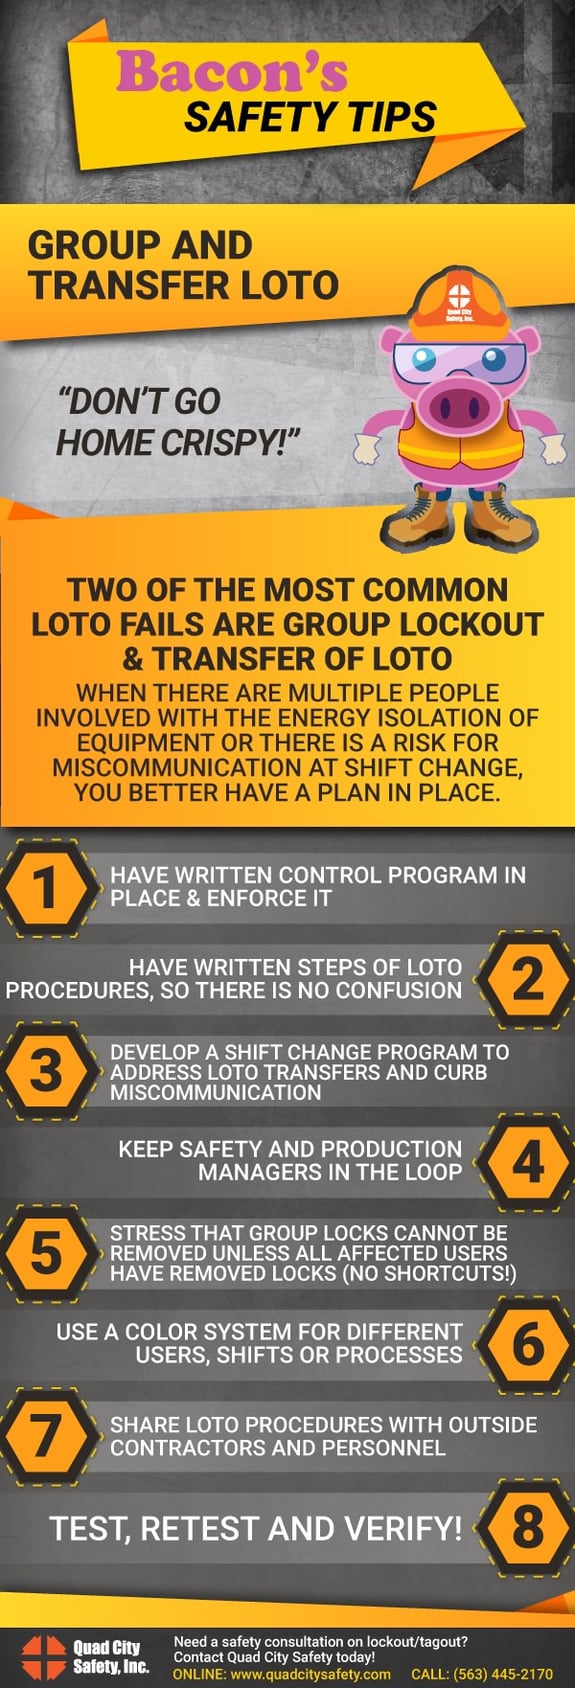 Bacon’s Safety Tips Group and Transfer LOTO.